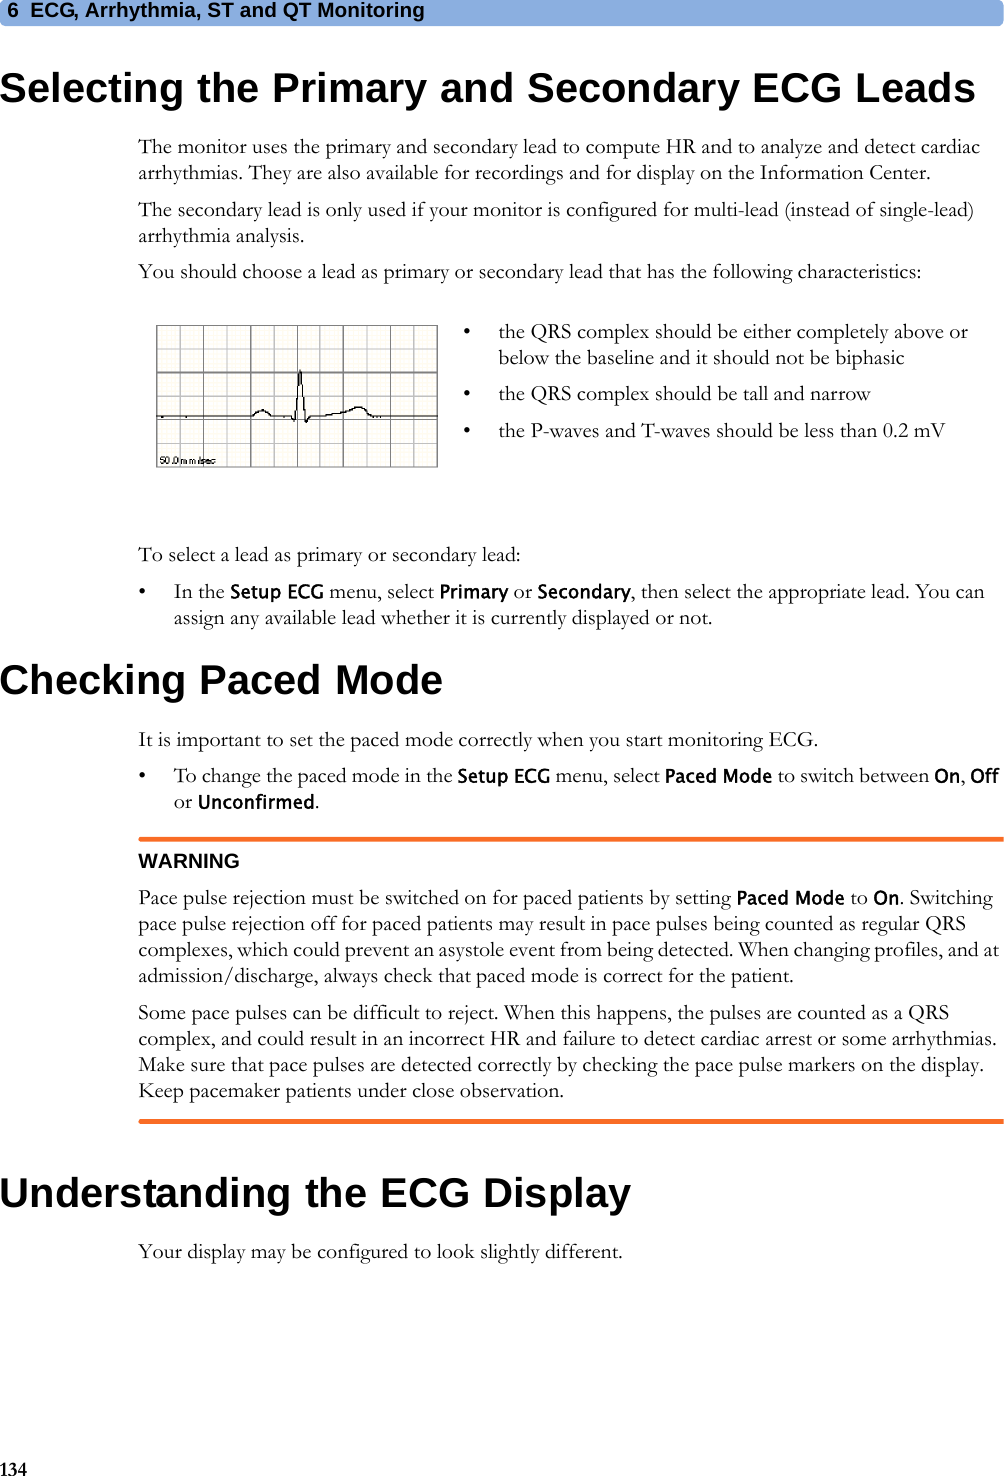 6 ECG, Arrhythmia, ST and QT Monitoring134Selecting the Primary and Secondary ECG LeadsThe monitor uses the primary and secondary lead to compute HR and to analyze and detect cardiac arrhythmias. They are also available for recordings and for display on the Information Center.The secondary lead is only used if your monitor is configured for multi-lead (instead of single-lead) arrhythmia analysis.You should choose a lead as primary or secondary lead that has the following characteristics:To select a lead as primary or secondary lead:•In the Setup ECG menu, select Primary or Secondary, then select the appropriate lead. You can assign any available lead whether it is currently displayed or not.Checking Paced ModeIt is important to set the paced mode correctly when you start monitoring ECG.• To change the paced mode in the Setup ECG menu, select Paced Mode to switch between On, Off or Unconfirmed.WARNINGPace pulse rejection must be switched on for paced patients by setting Paced Mode to On. Switching pace pulse rejection off for paced patients may result in pace pulses being counted as regular QRS complexes, which could prevent an asystole event from being detected. When changing profiles, and at admission/discharge, always check that paced mode is correct for the patient.Some pace pulses can be difficult to reject. When this happens, the pulses are counted as a QRS complex, and could result in an incorrect HR and failure to detect cardiac arrest or some arrhythmias. Make sure that pace pulses are detected correctly by checking the pace pulse markers on the display. Keep pacemaker patients under close observation.Understanding the ECG DisplayYour display may be configured to look slightly different.• the QRS complex should be either completely above or below the baseline and it should not be biphasic• the QRS complex should be tall and narrow• the P-waves and T-waves should be less than 0.2 mV